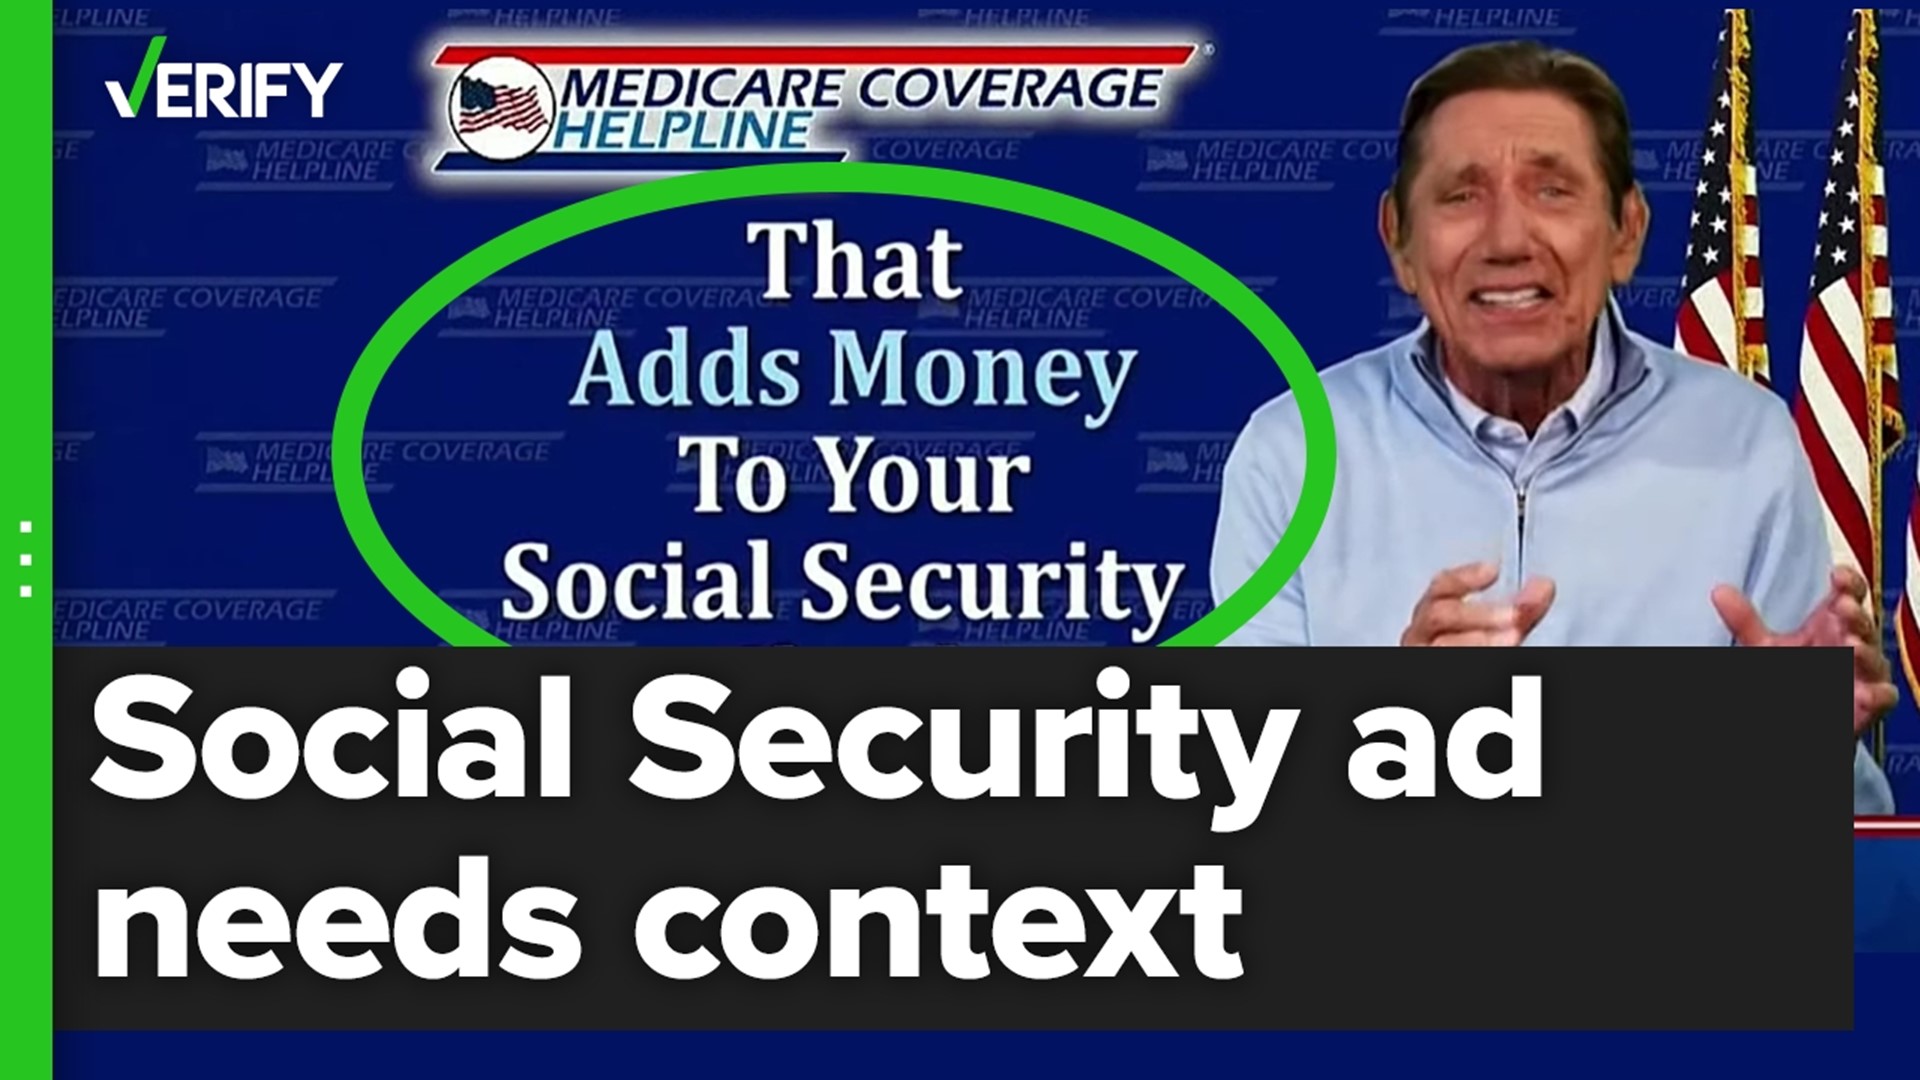 A VERIFY viewer asked if a Medicare ad claiming to put money back into your Social Security check is legit. Here’s why this ad needs additional context.